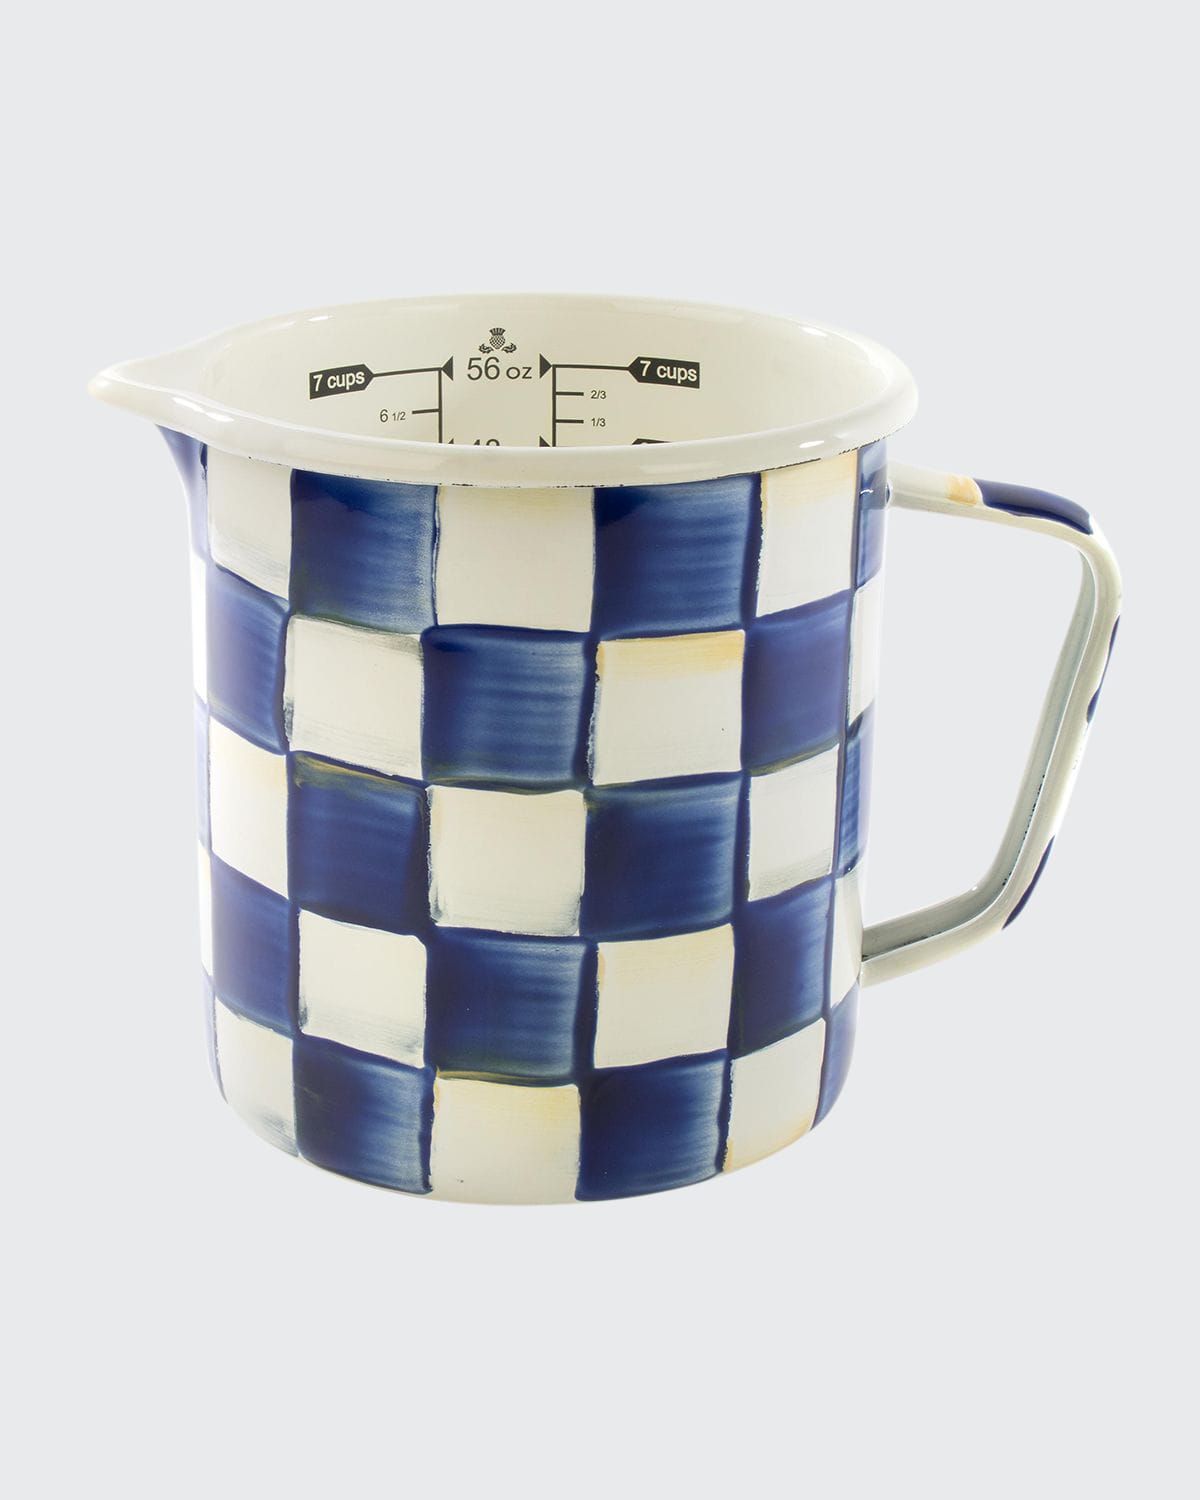 Mackenzie-childs Royal Check 7 Cup Measuring Cup In Blue/white